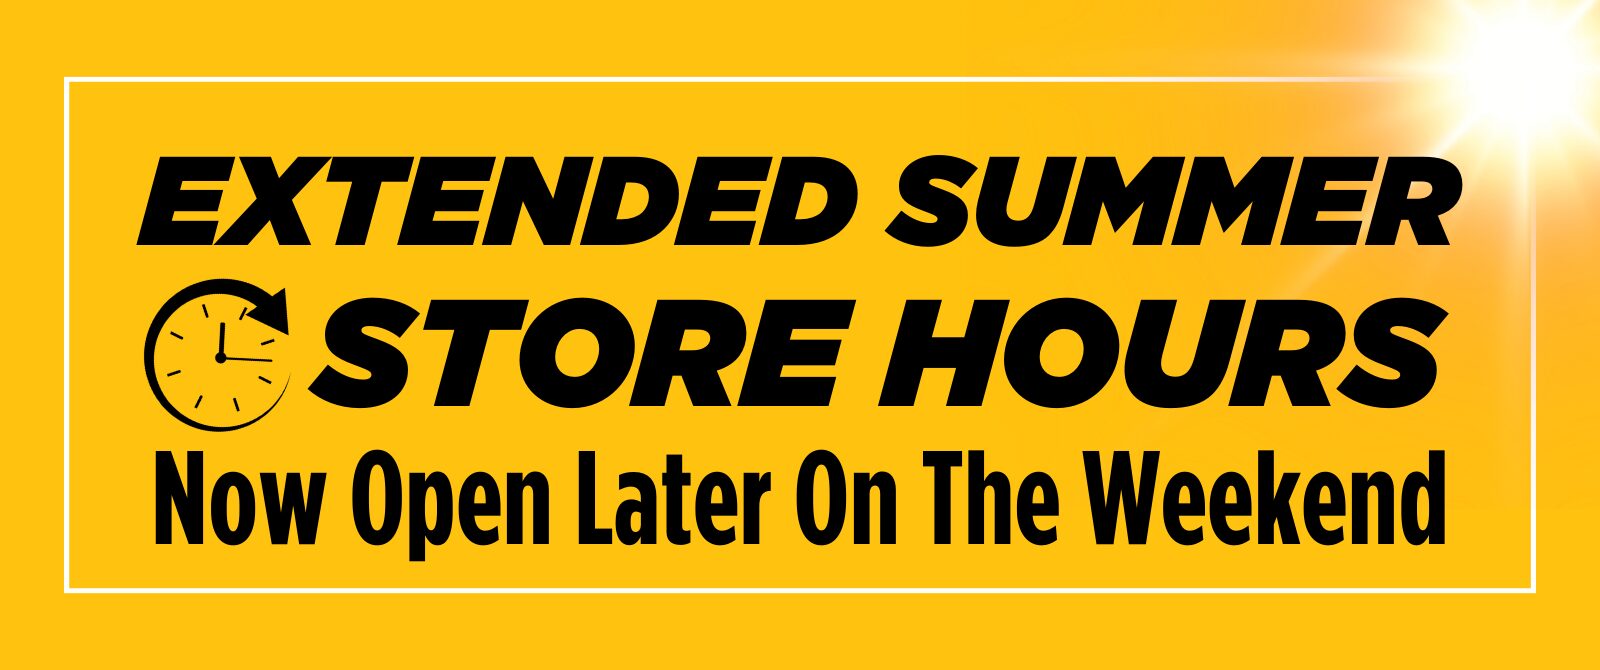 Extended Summer Store Hours